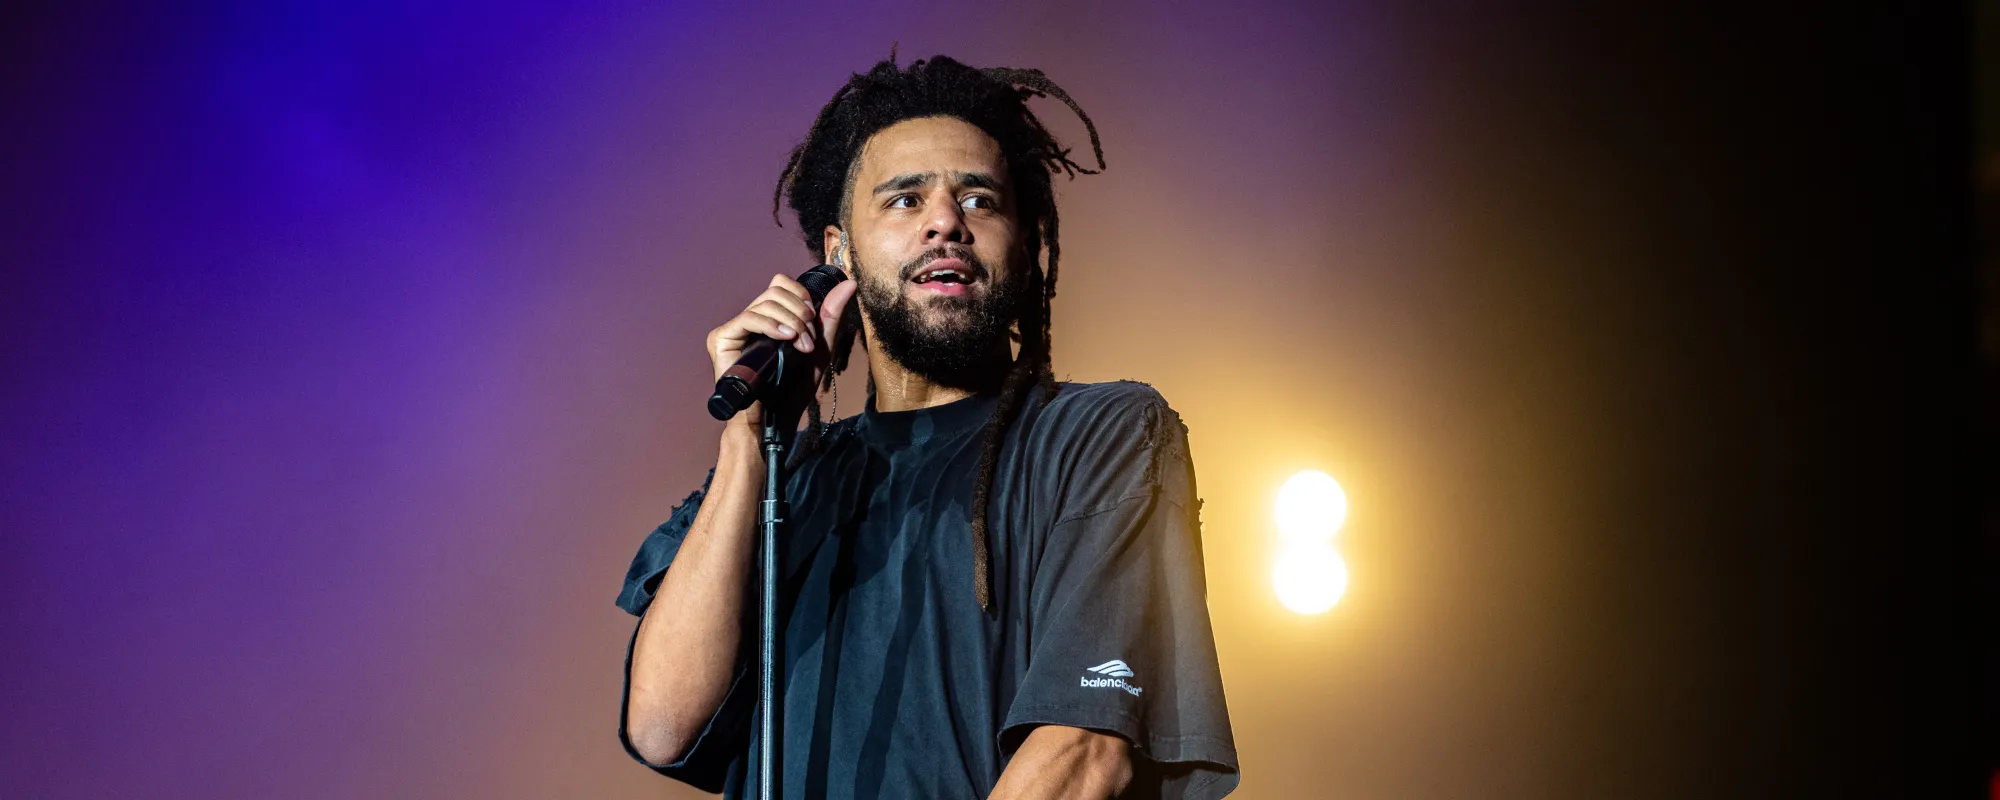 J. Cole Shares List of Hip-Hop Artists Who Inspired Him